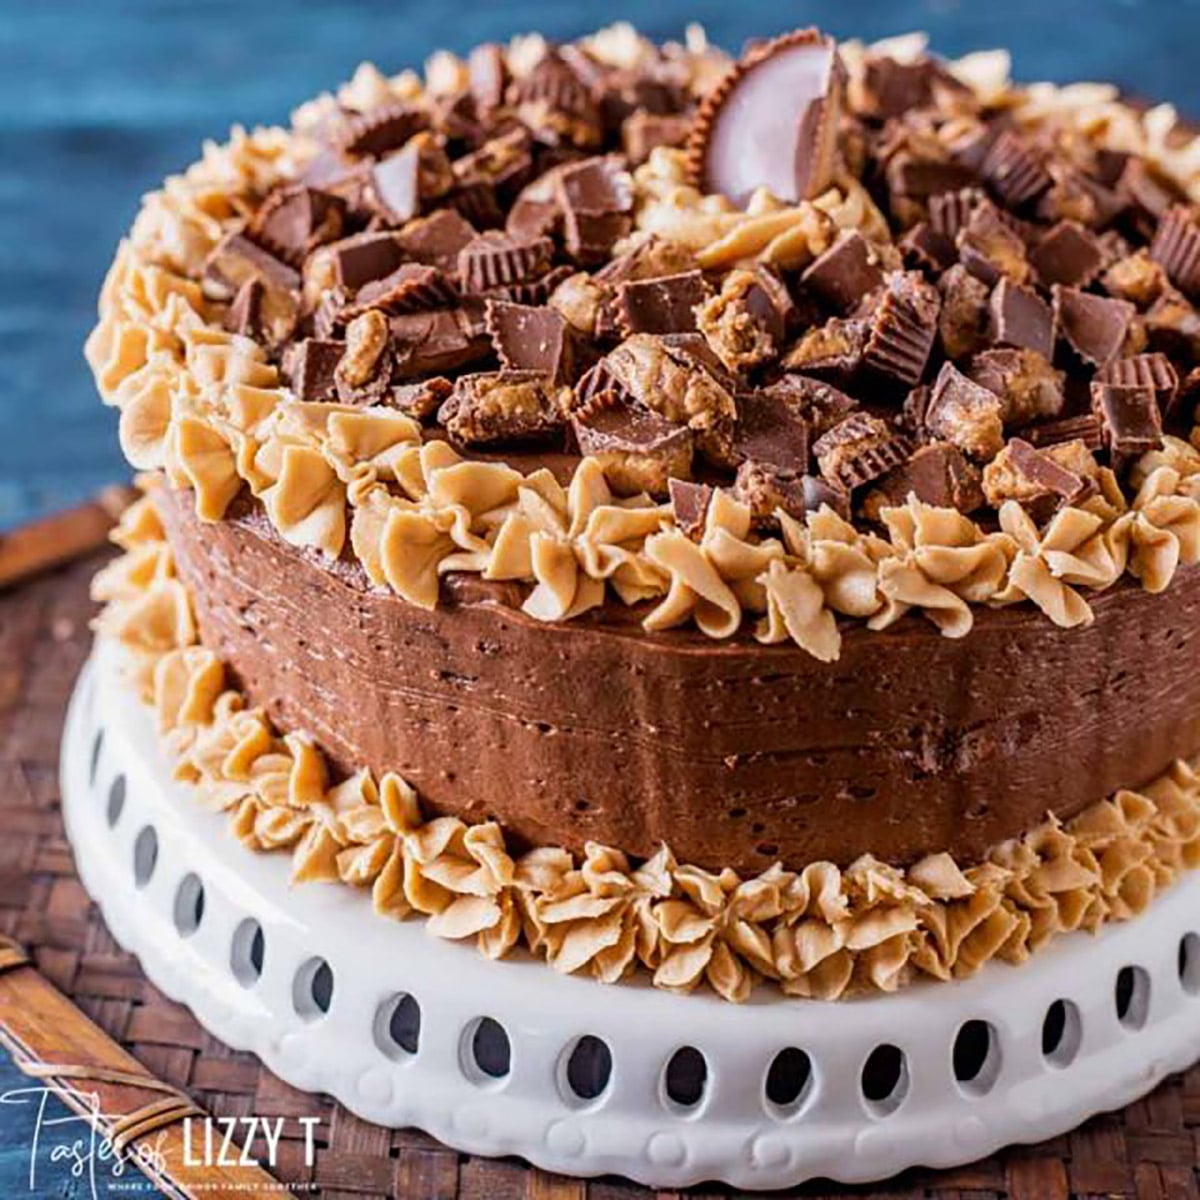 Reese's Peanut Butter Cup Earthquake Cake